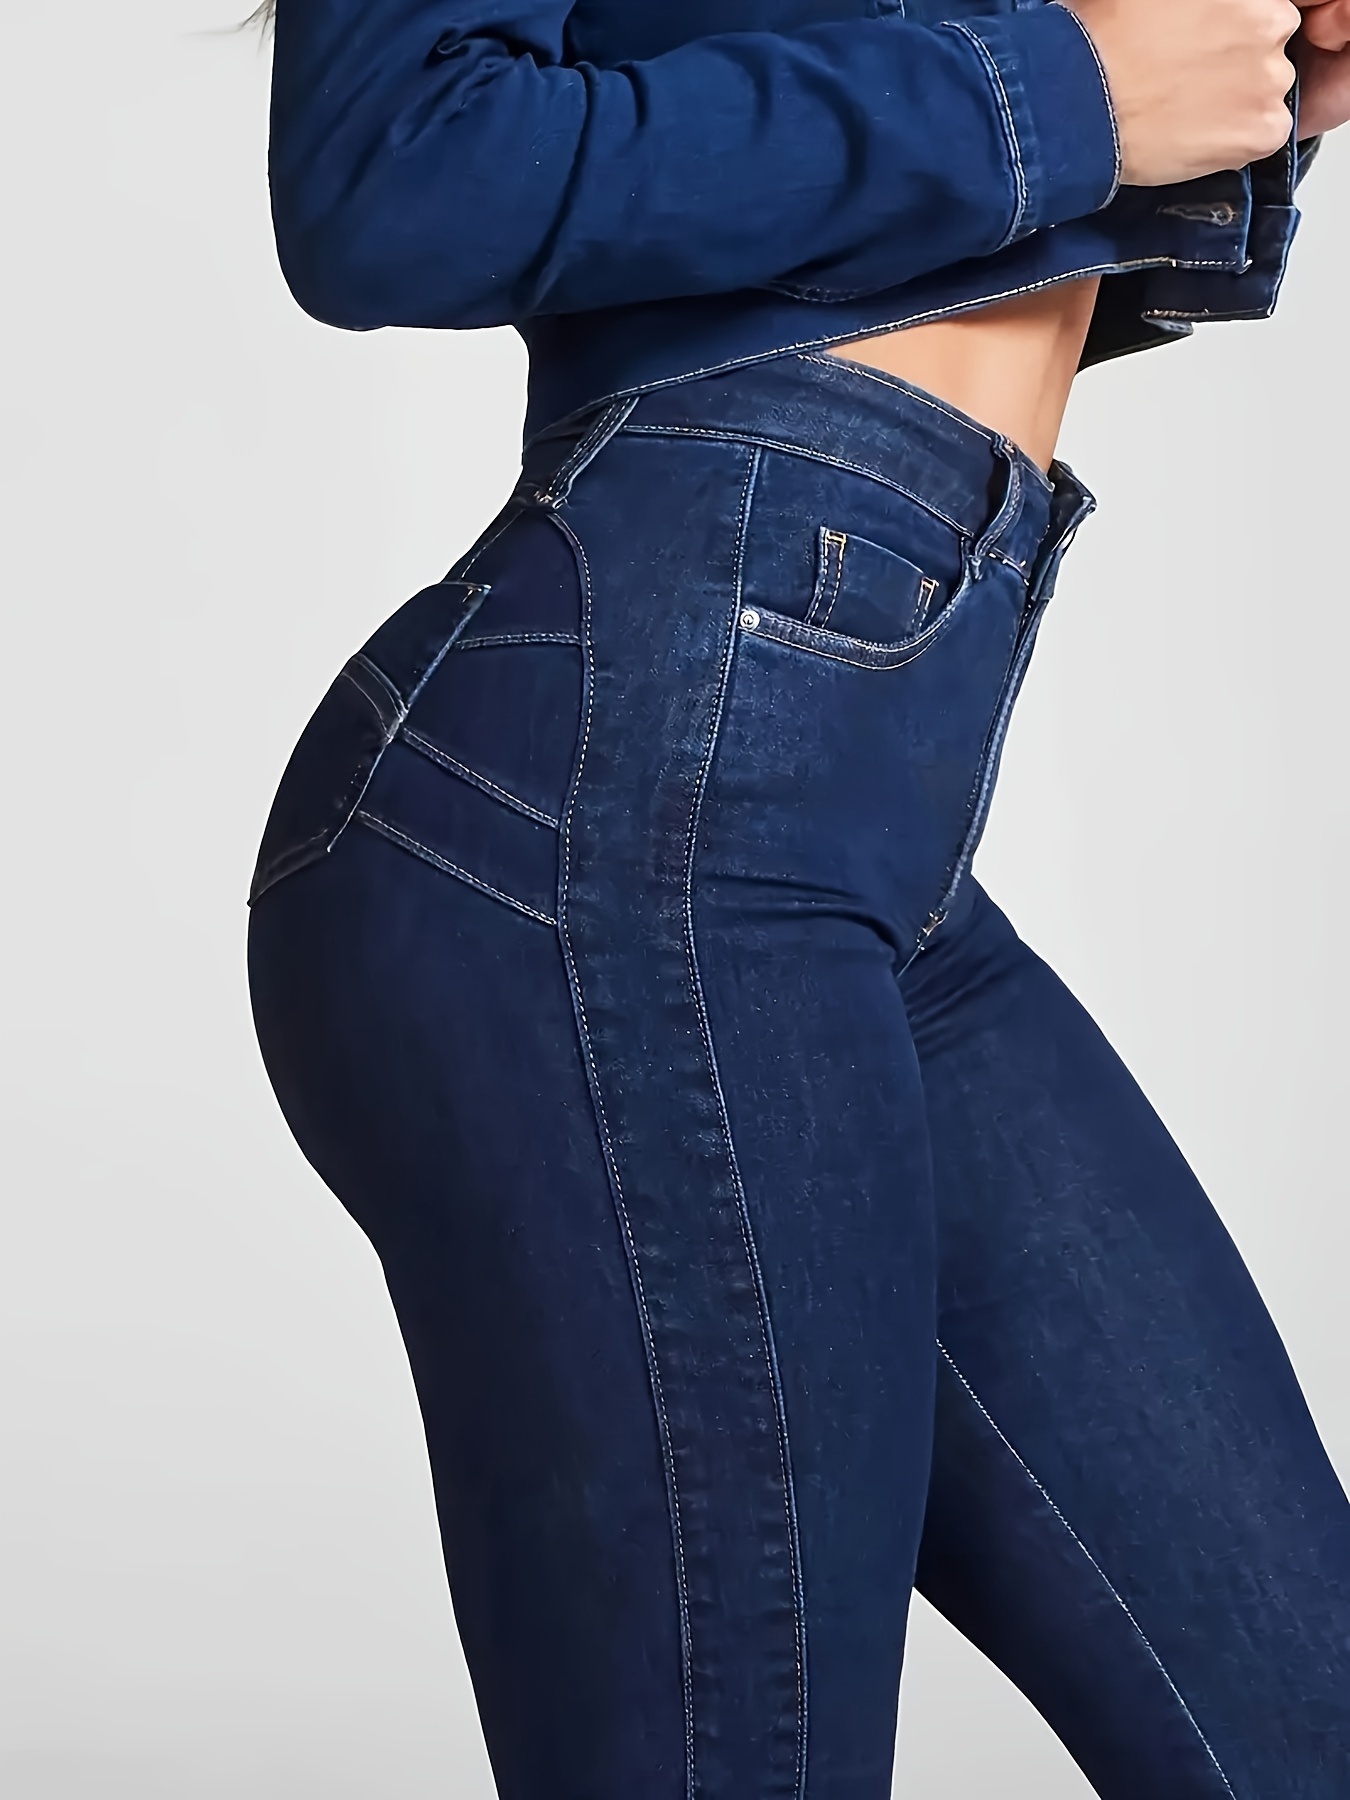 Slimming Jeans for Women Buttons Stretchy Butt Lifting Ripped